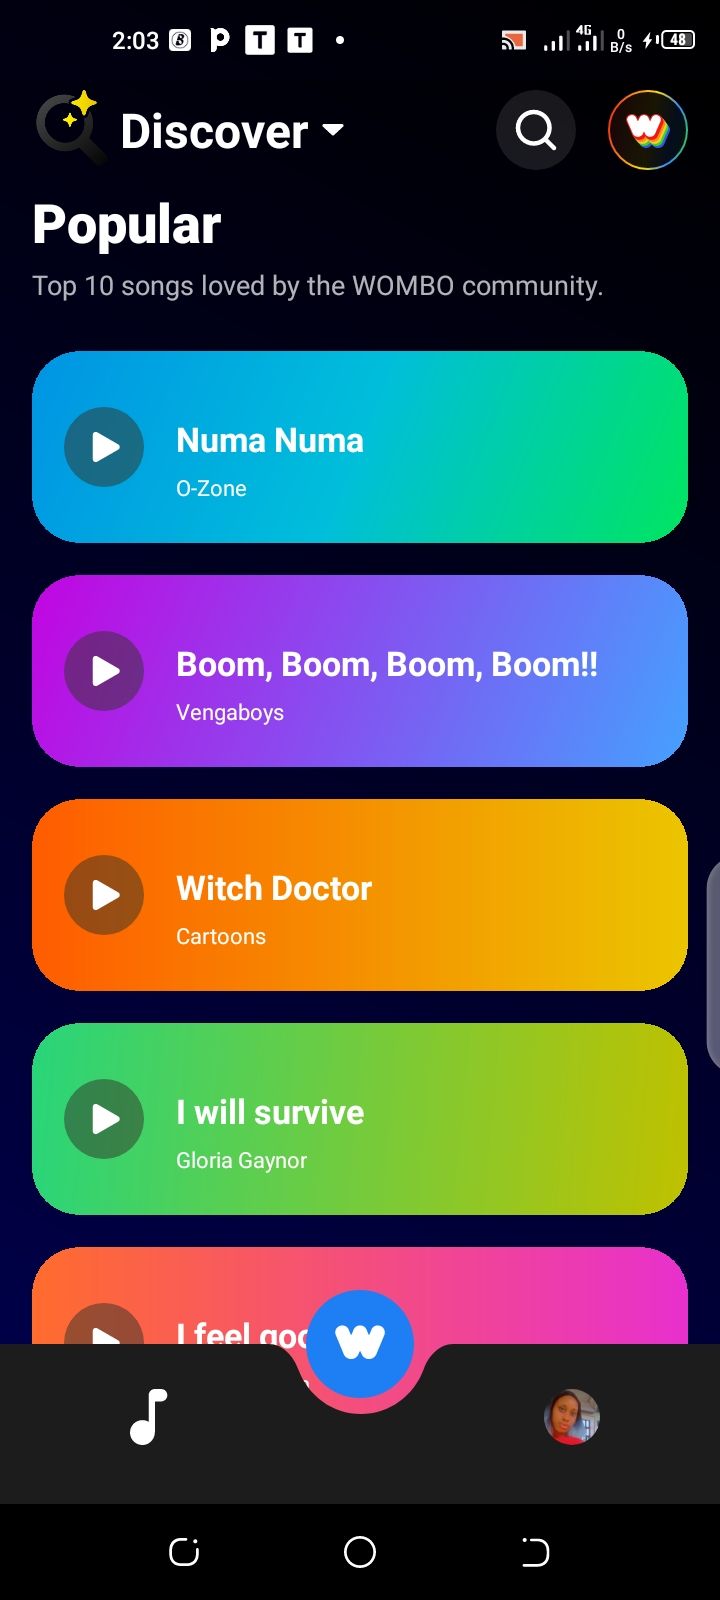 Some available songs on the Wombo app